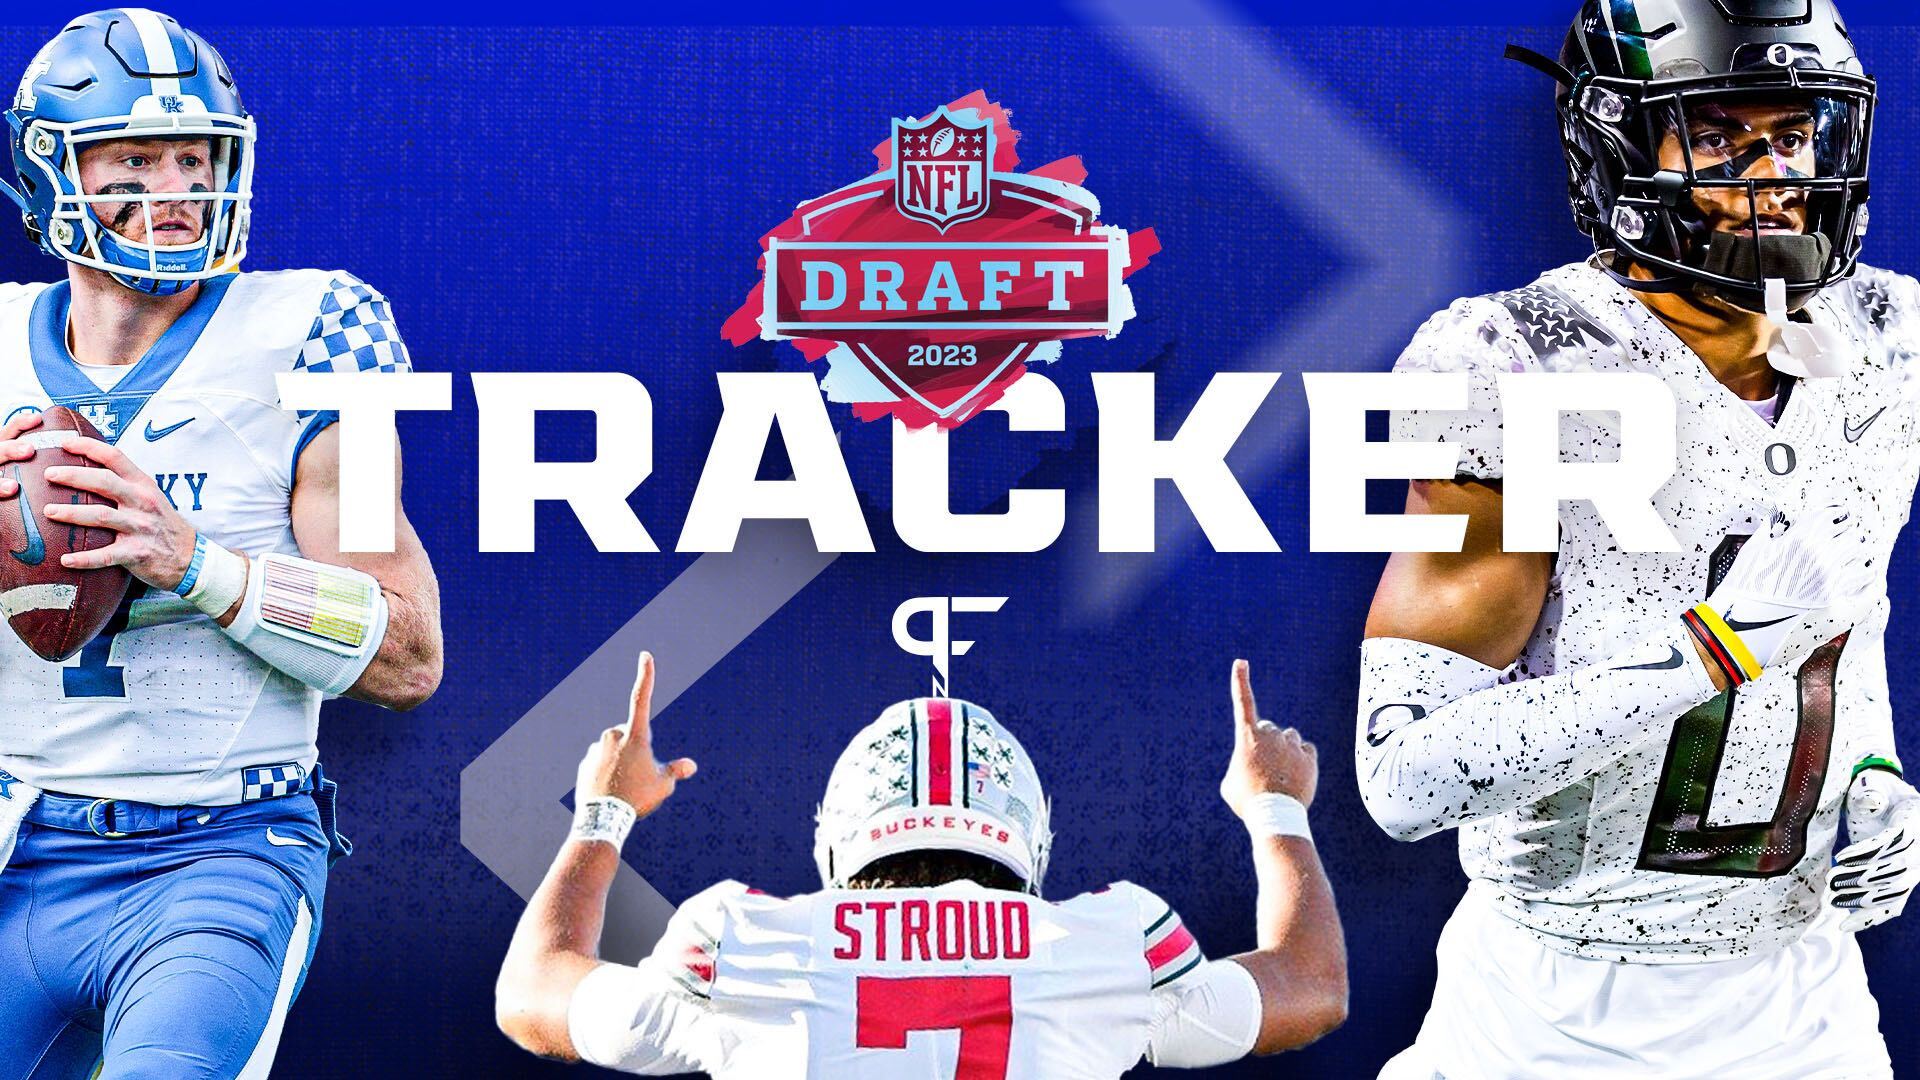 2023 NFL Draft Complete Results, Recap, Order, and All 259 Picks